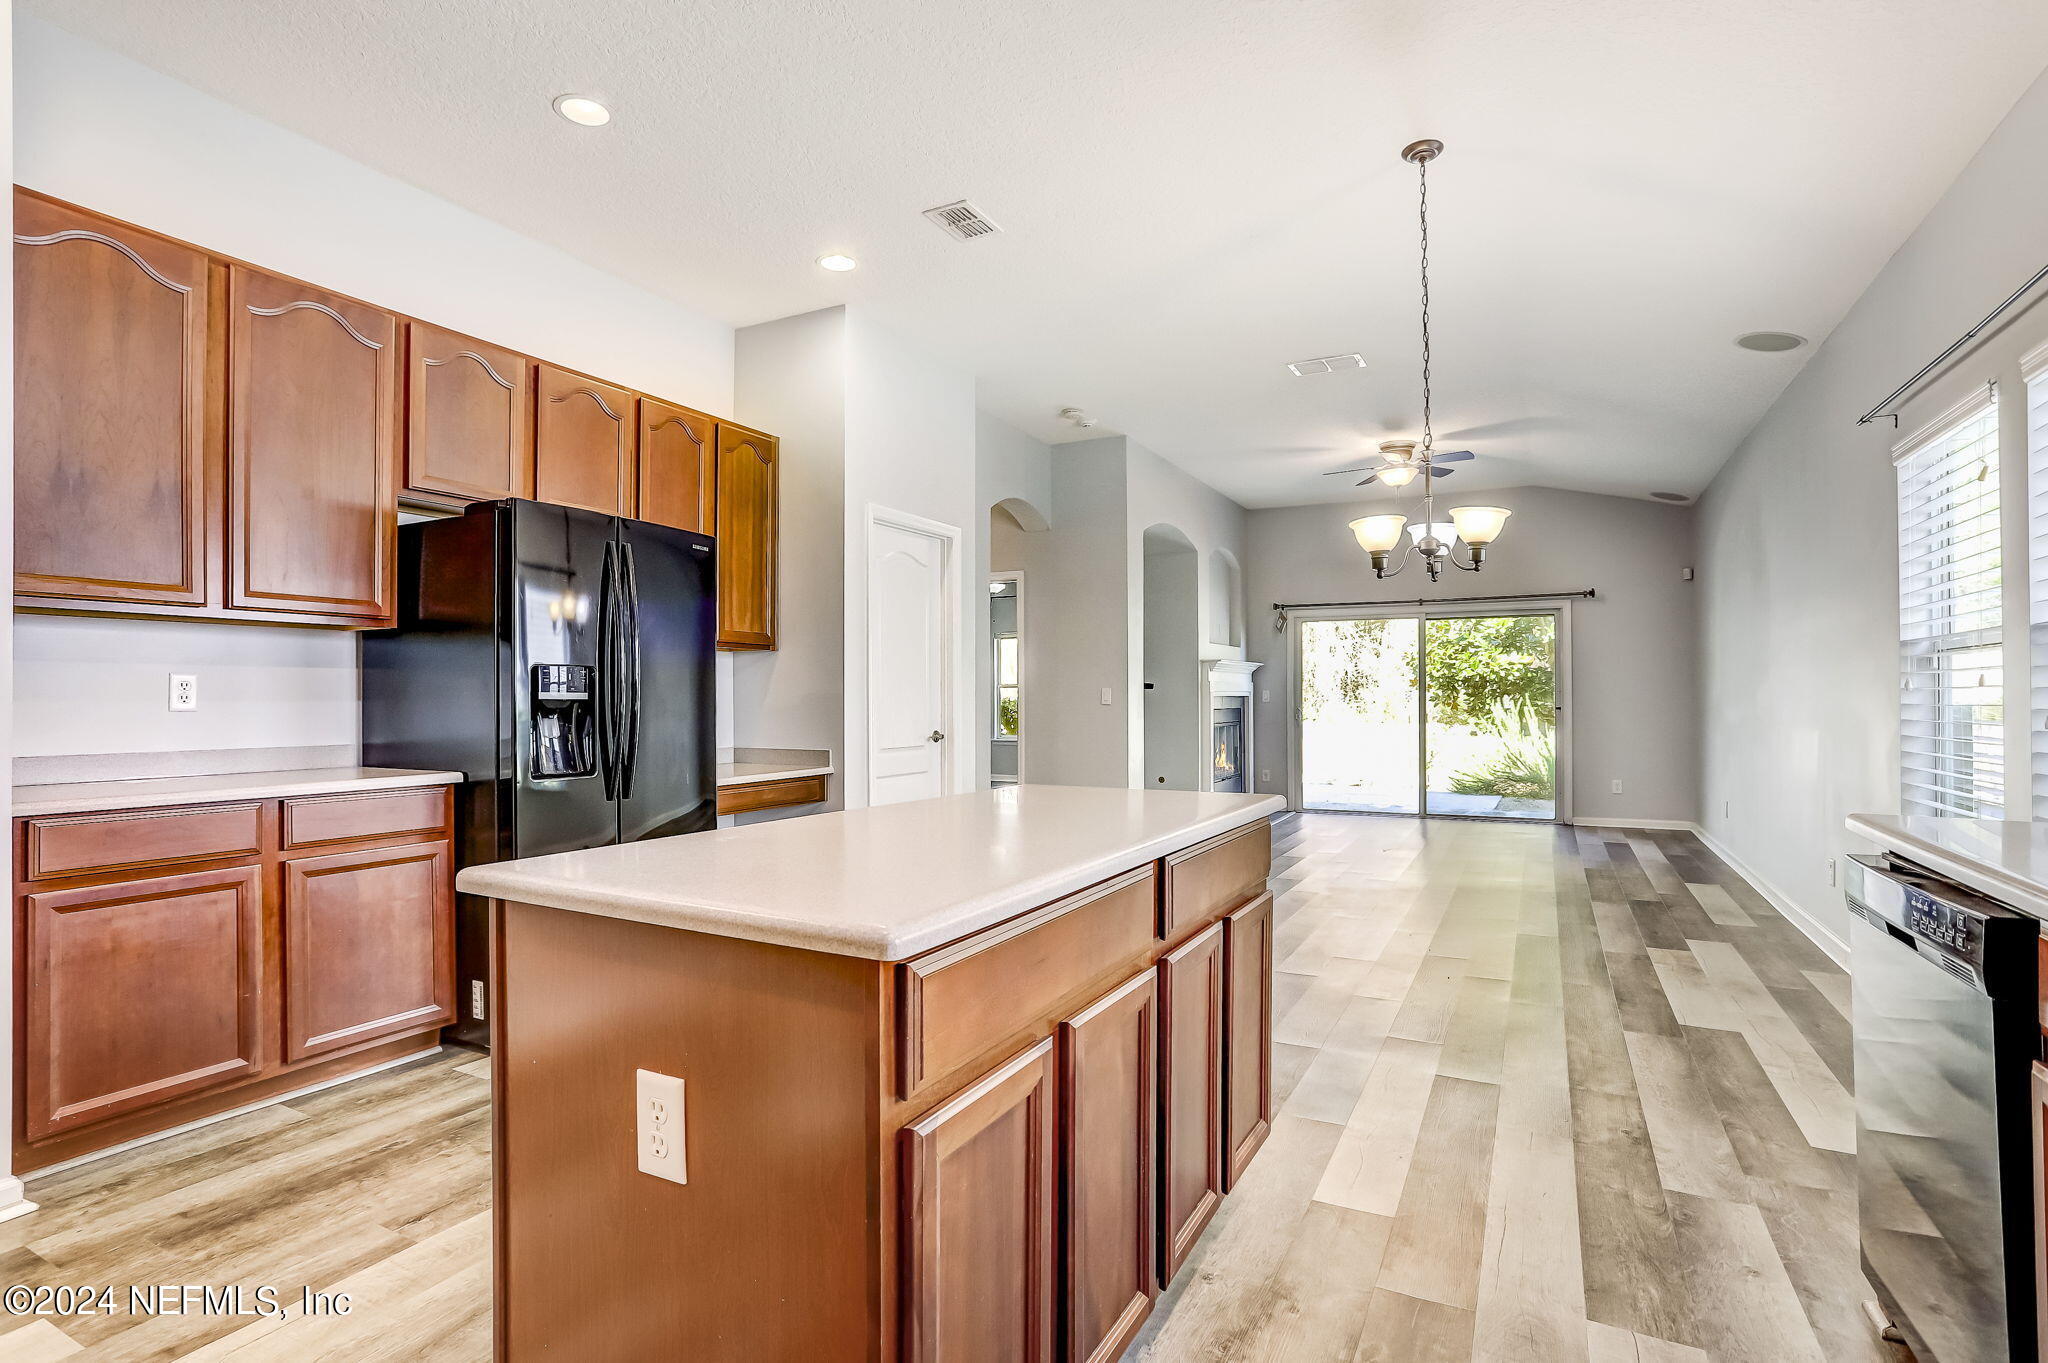 a kitchen with stainless steel appliances kitchen island granite countertop a refrigerator a sink dishwasher and white cabinets with wooden floor